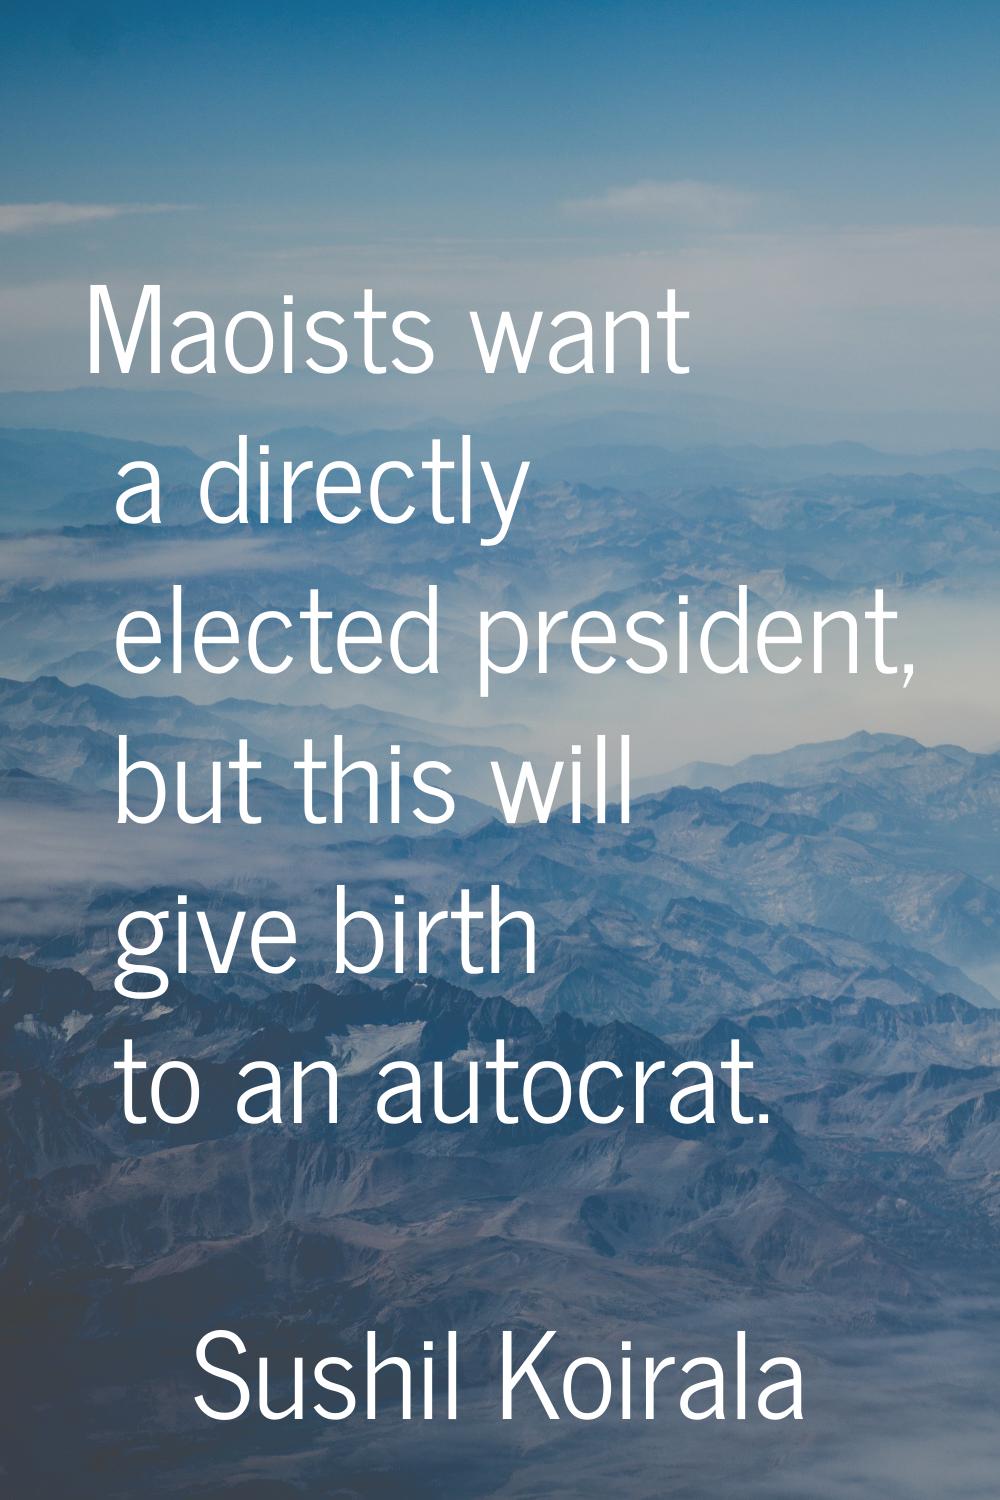 Maoists want a directly elected president, but this will give birth to an autocrat.